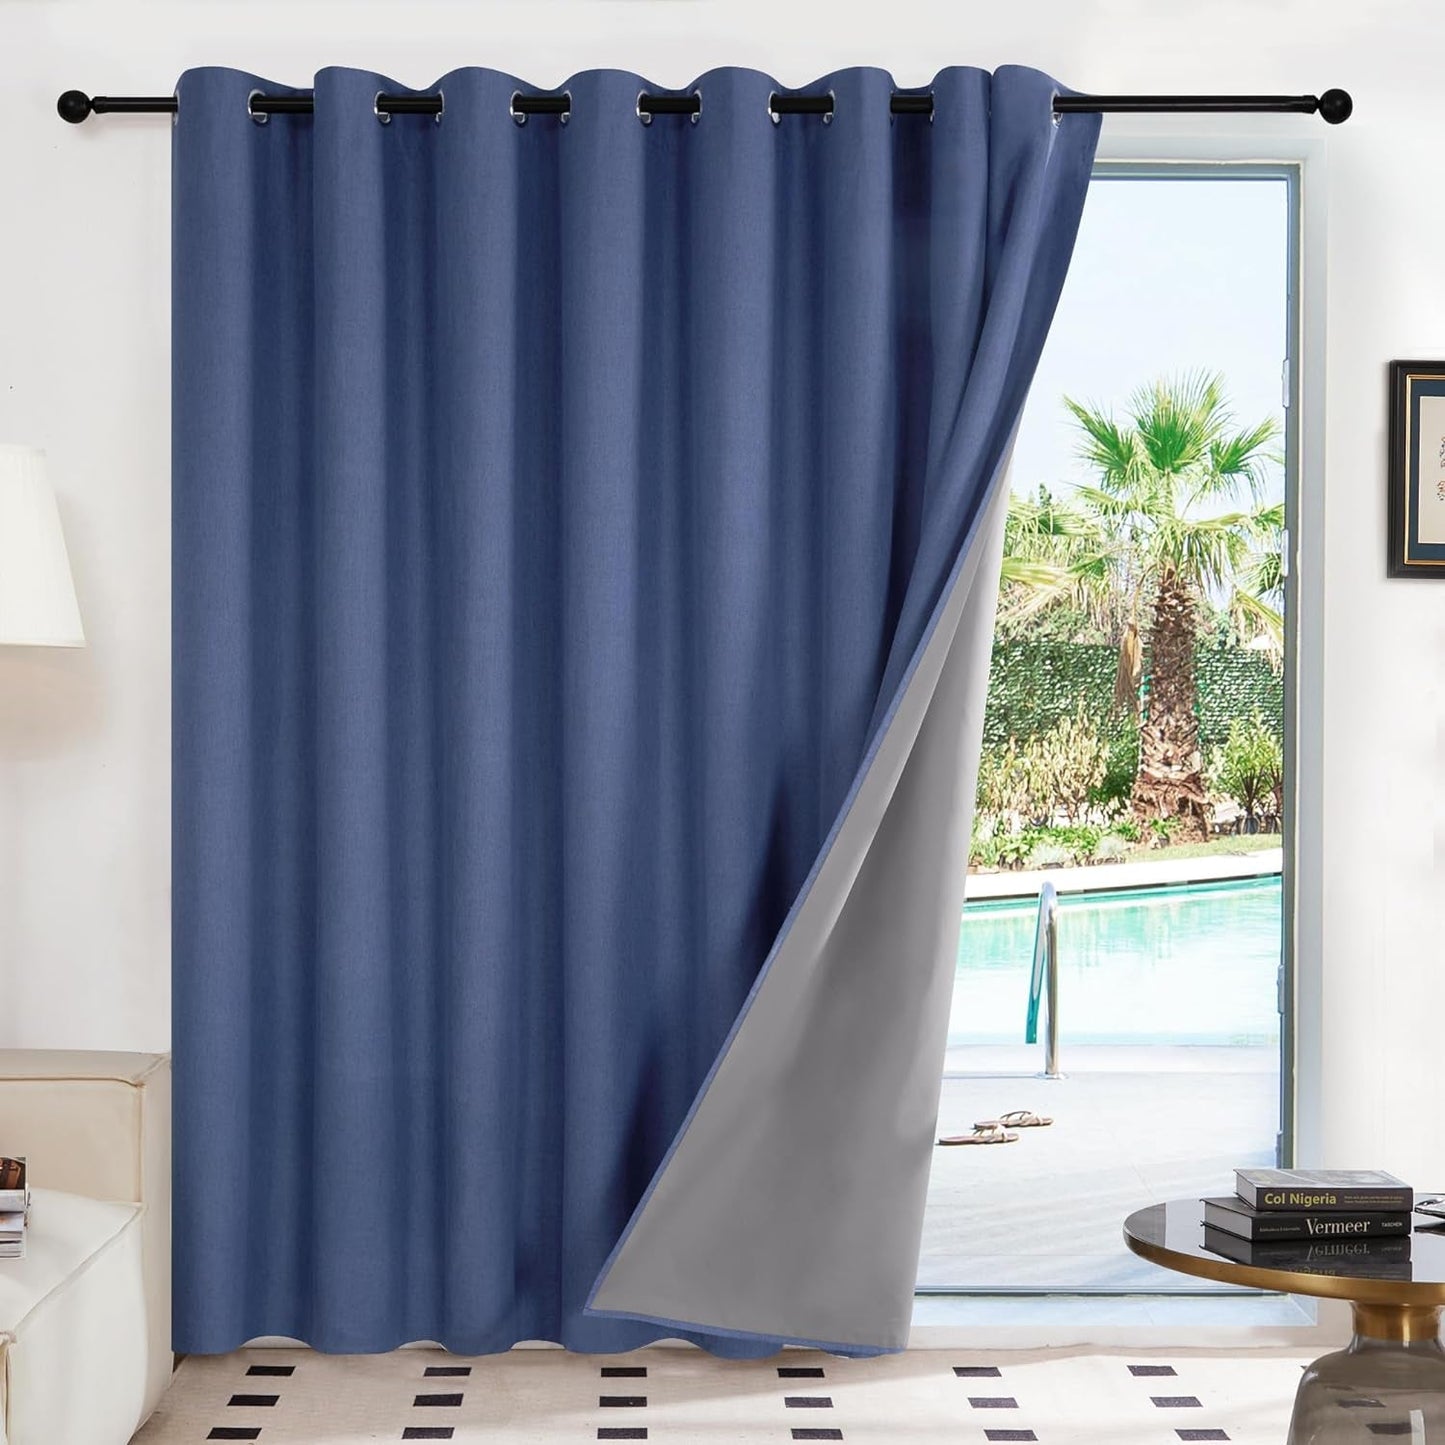 Deconovo Room Divider Curtains for Patio Door, 100% Total Light Blocking Thick Sliding Door Curtains, Extra Wide Blackout Curtains for Bedroom and Living Room (Flaxen, 100W X 84L Inch)